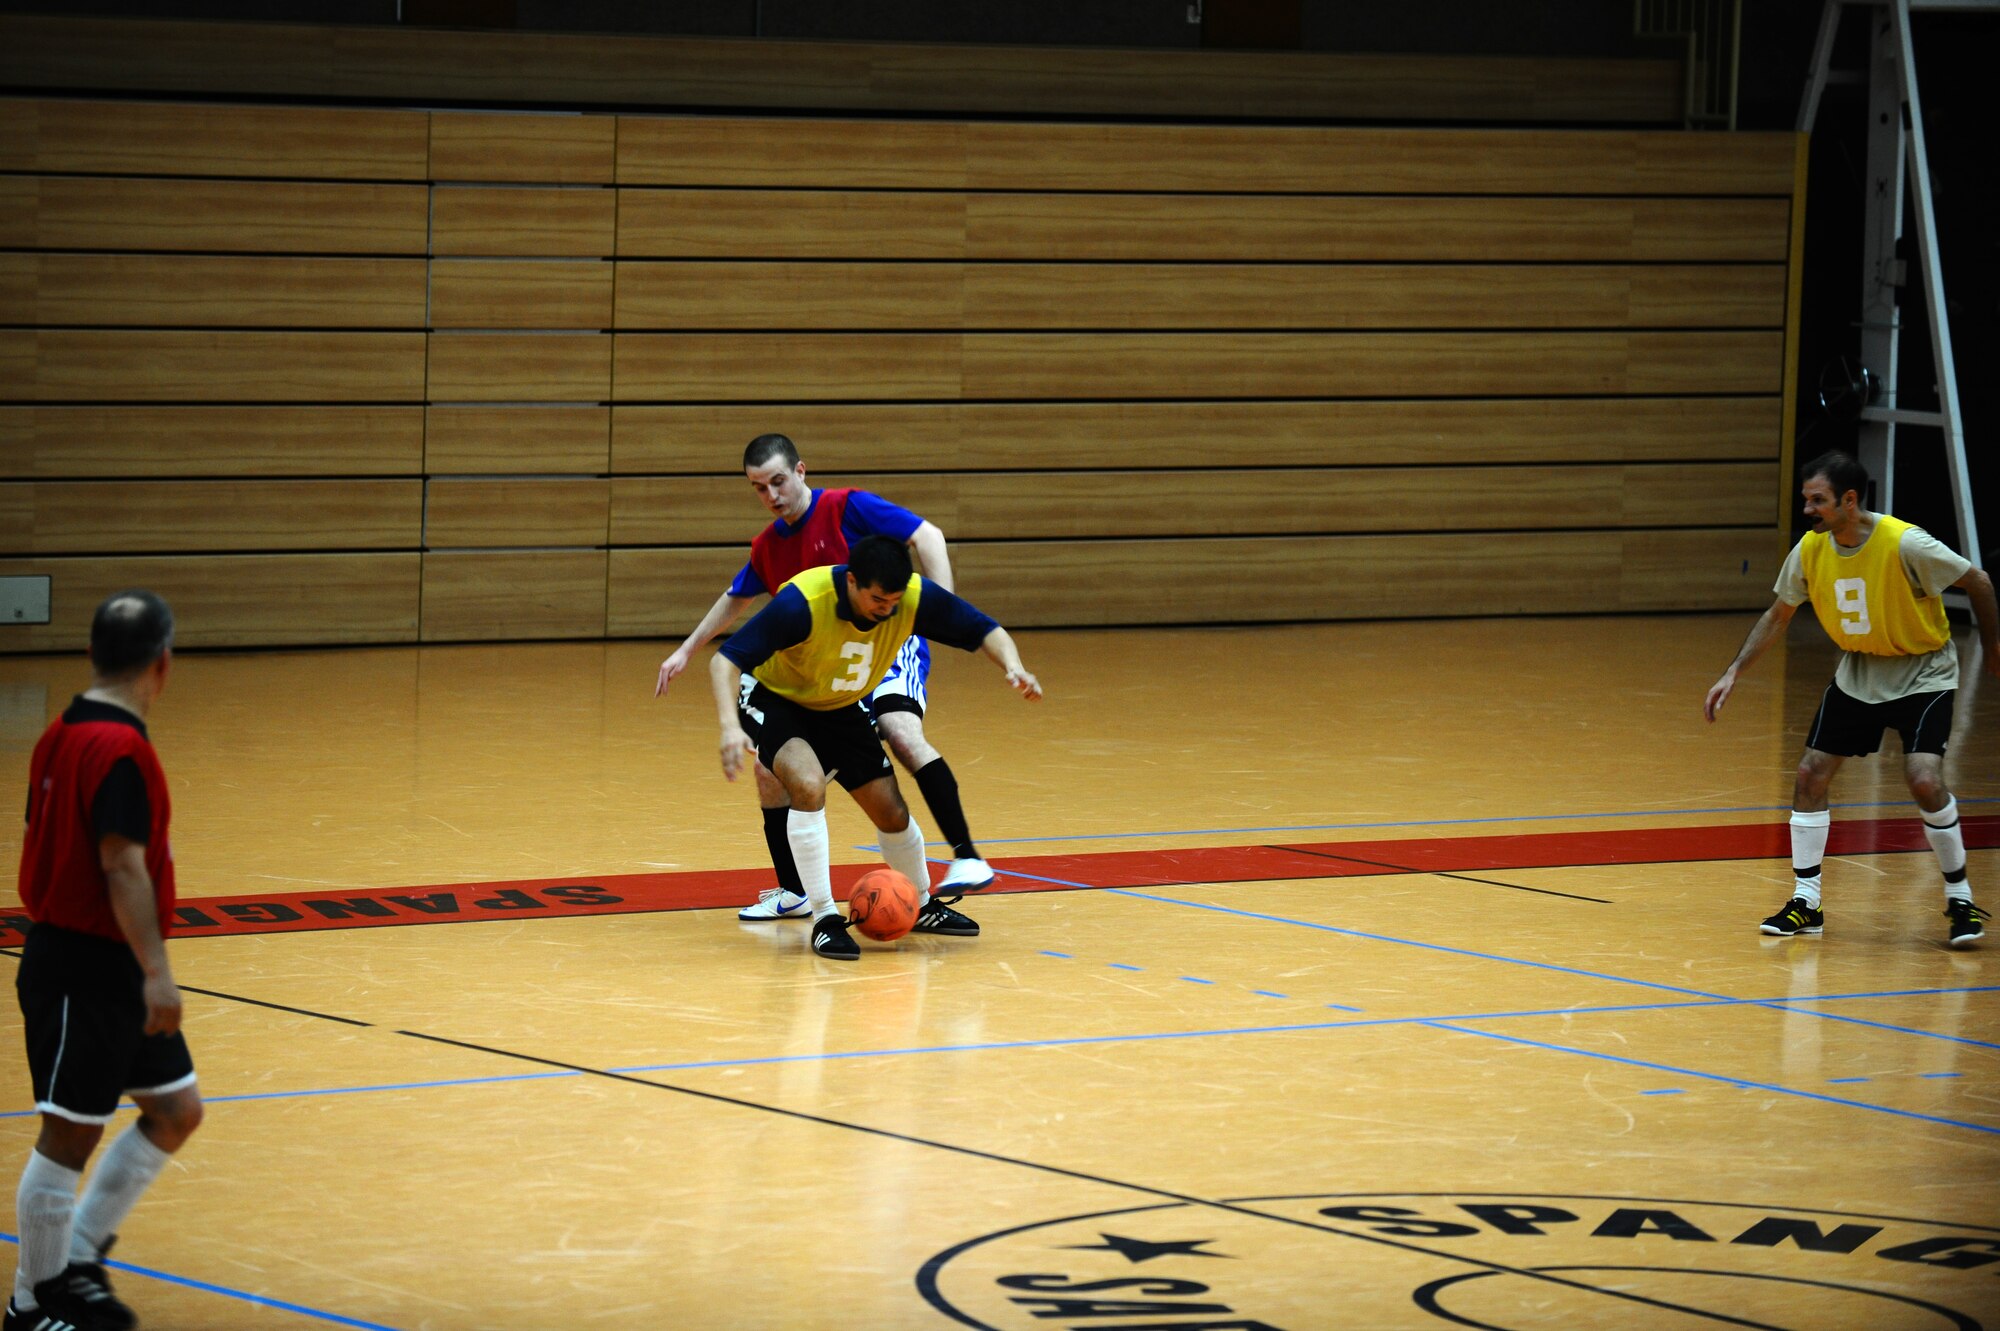 SPANGDAHLEM AIR BASE, Germany – Rodney Curtis, yellow, 81st Fighter Squadron, and Carl Miller, red, 52nd Force Support Squadron, struggle for control of the soccer ball during the indoor soccer championship at the Skelton Memorial Fitness Center here June 12. The 52nd FSS defeated the 81st FS in the first game 7-6. The 81st FS won the double-elimination championship after winning the second game 9-5. (U.S. Air Force photo by Airman 1st Class Matthew B. Fredericks/Released)